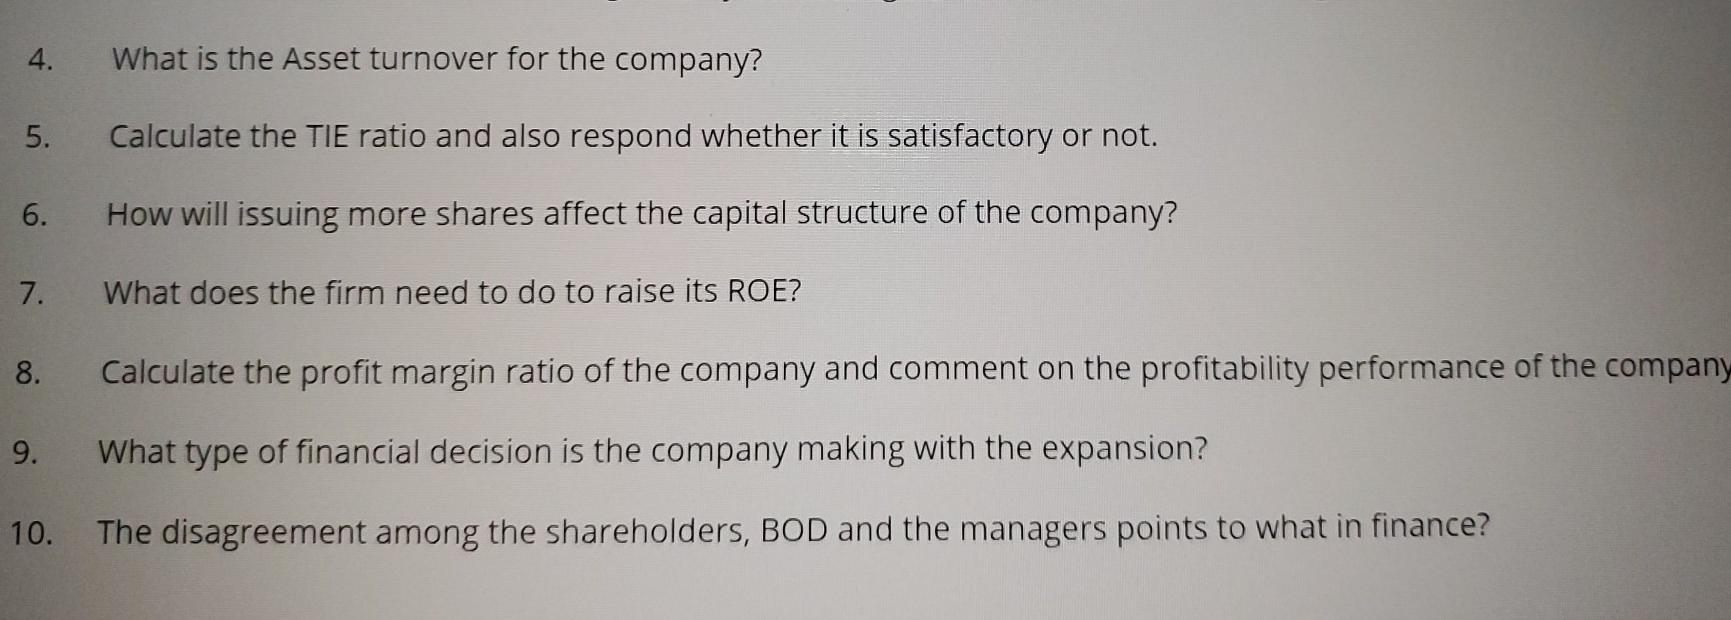 4. What is the Asset turnover for the company? 5. Calculate the TIE ratio and also respond whether it is satisfactory or not.